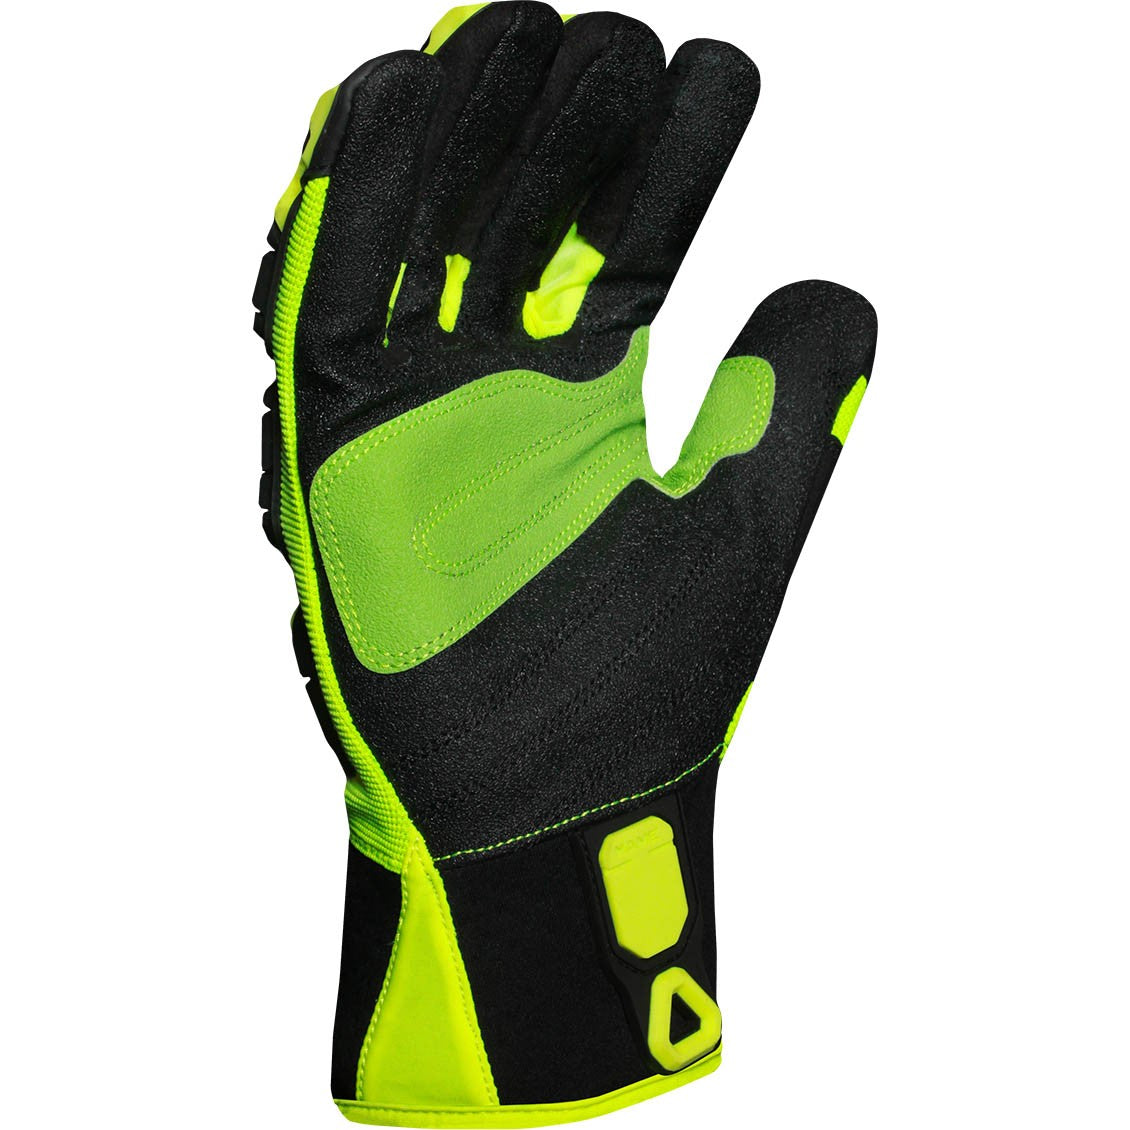 Ironclad INDI-RIG Industrial Impact Rigger Gloves